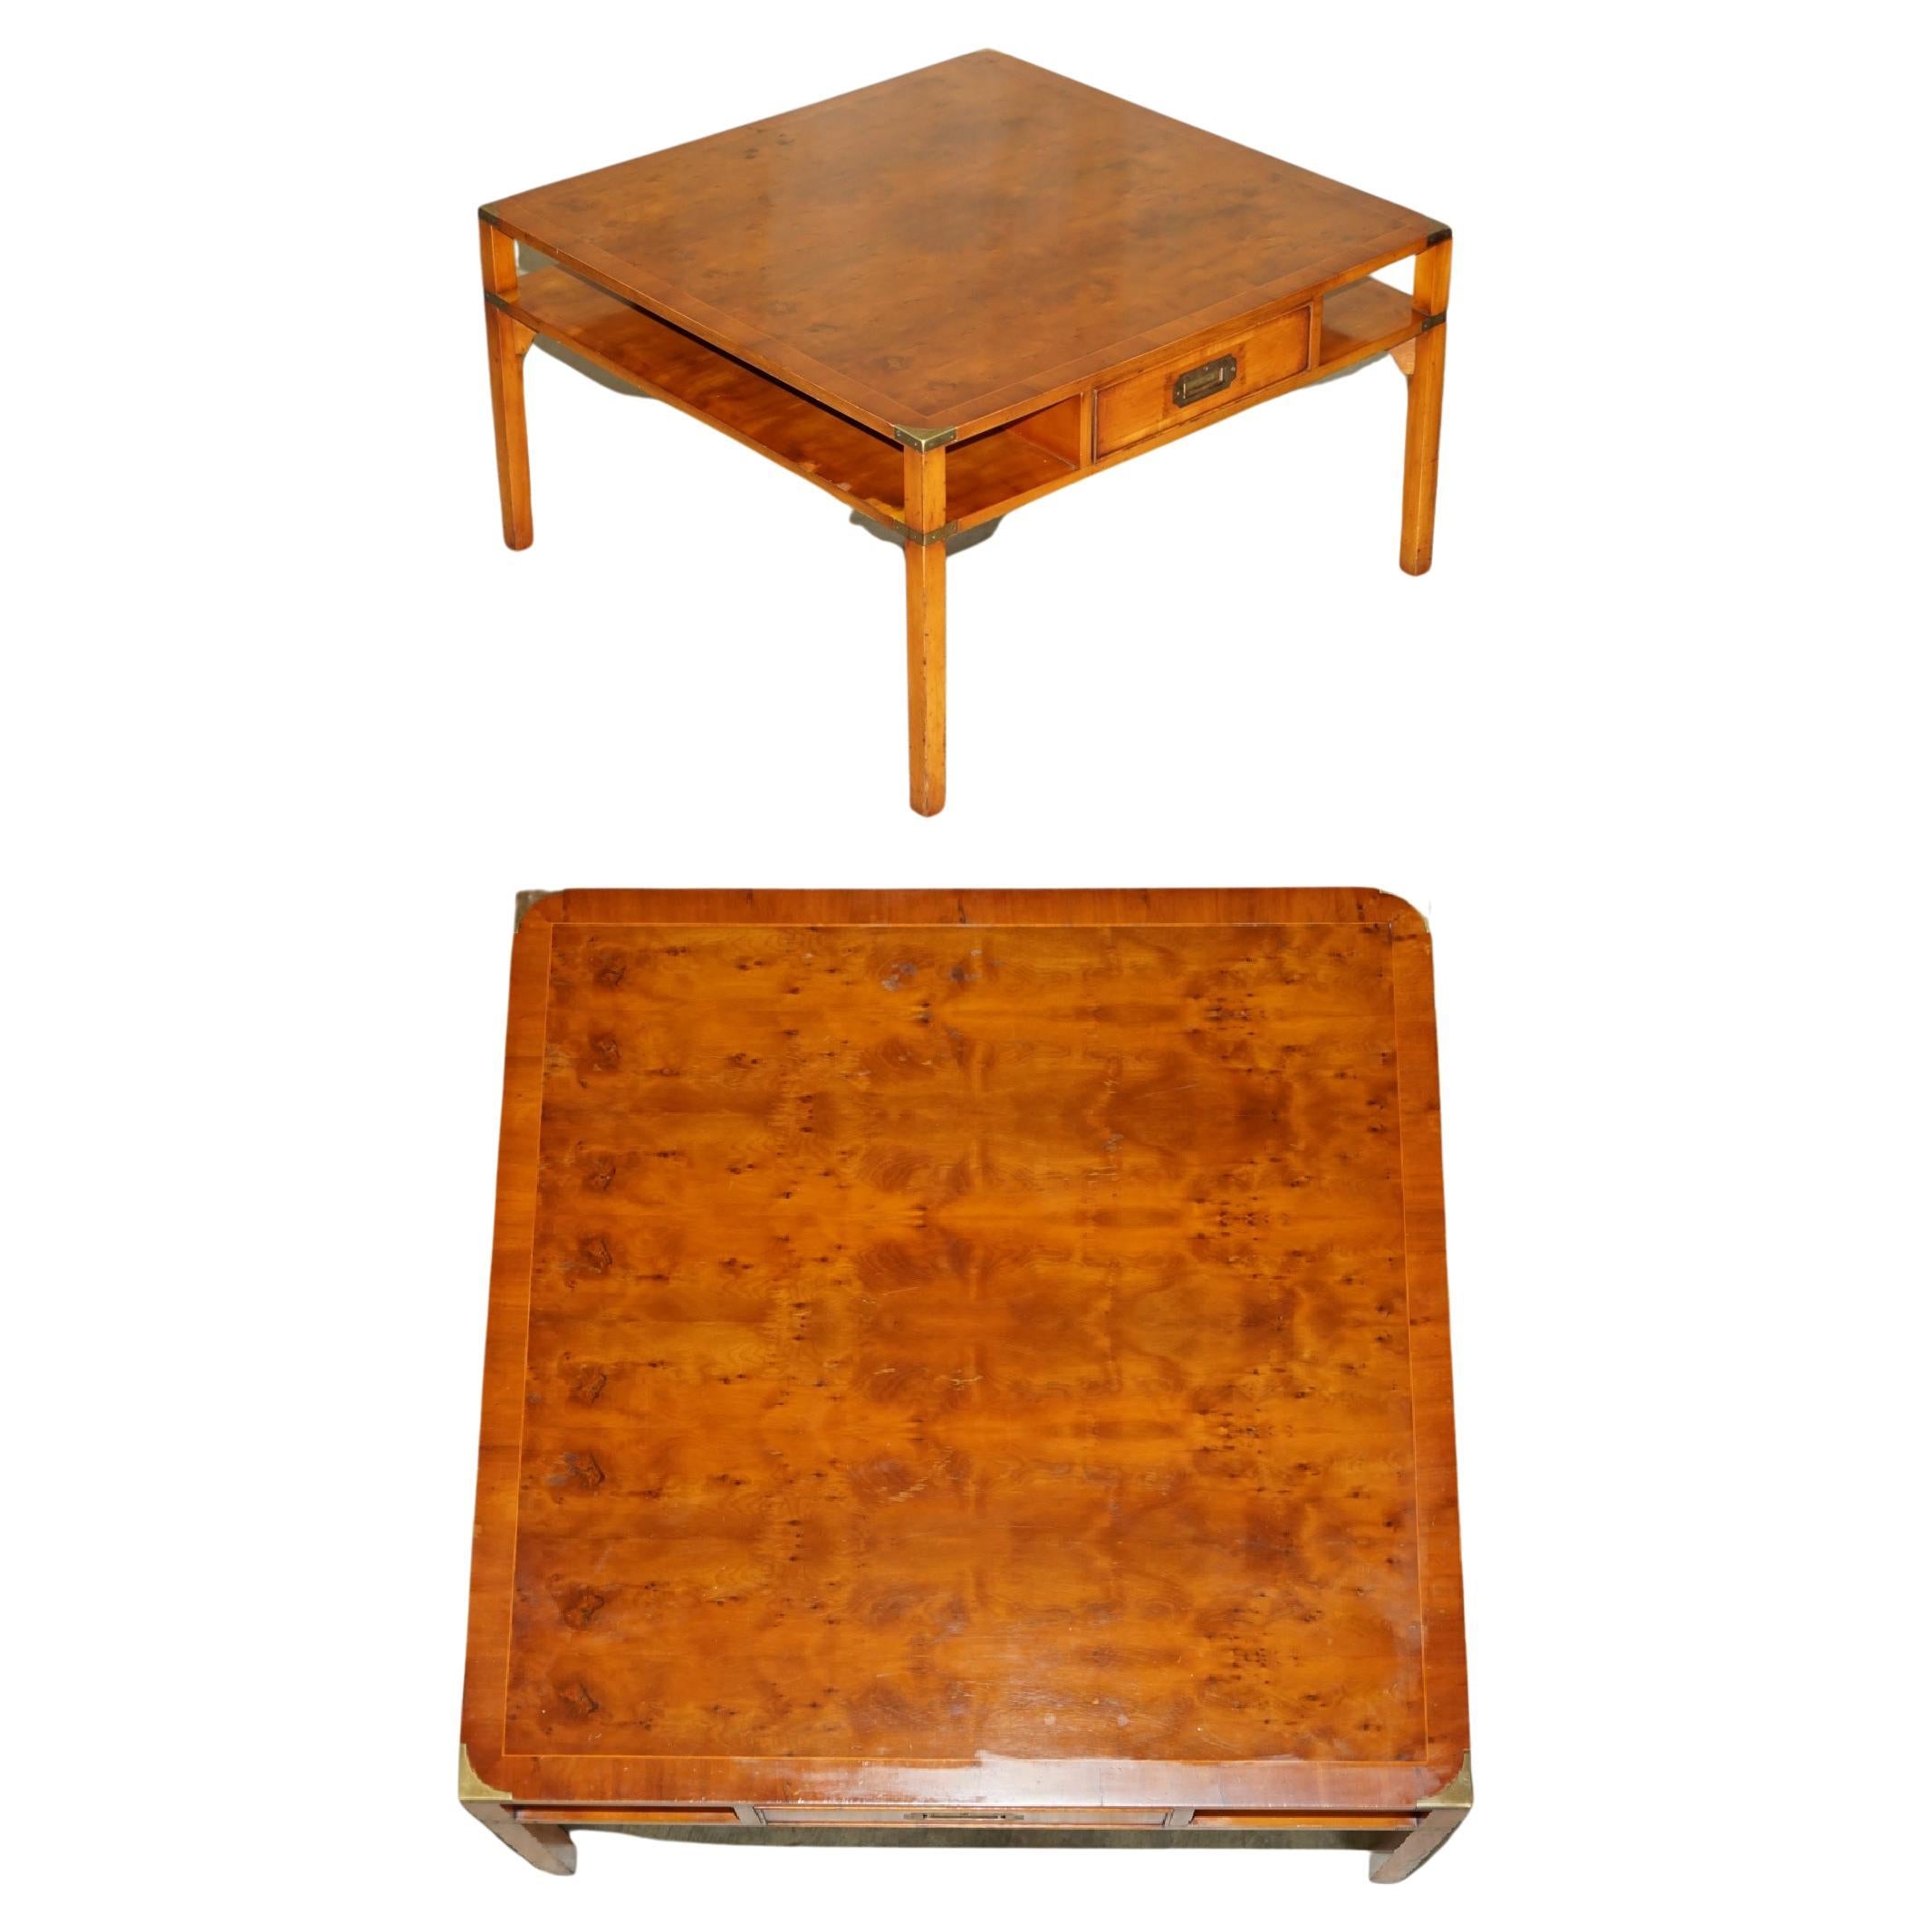 Sublime Vintage Military Campaign Burr Yew Wood Coffee Table with Book Shelf